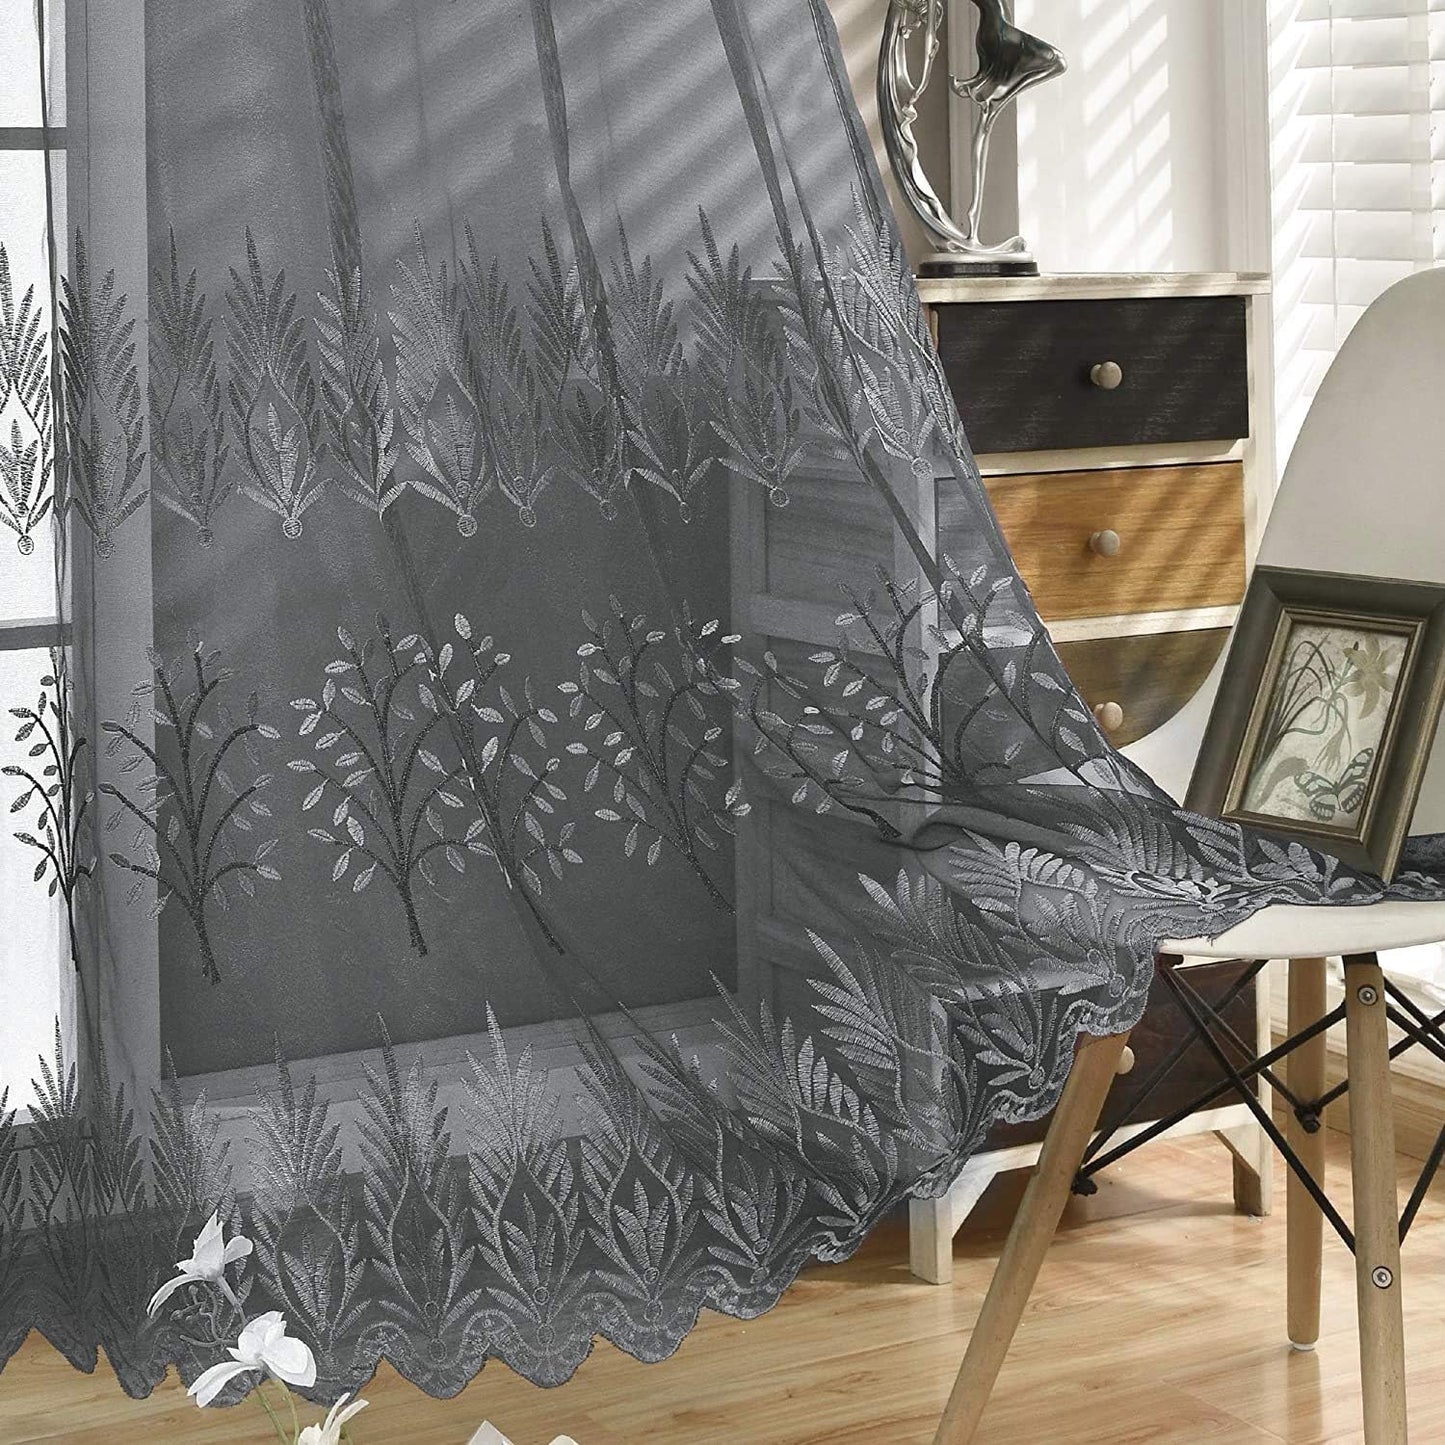 DONREN Tree Branch Printed Embroidery Sheer Curtains for Bedroom - Luxury Plum Purple Embroidery Sheer Curtain Panels for Living Room (W 52 X L 84 Inch,2 Panels)  DONREN Grey 52" X 84" 